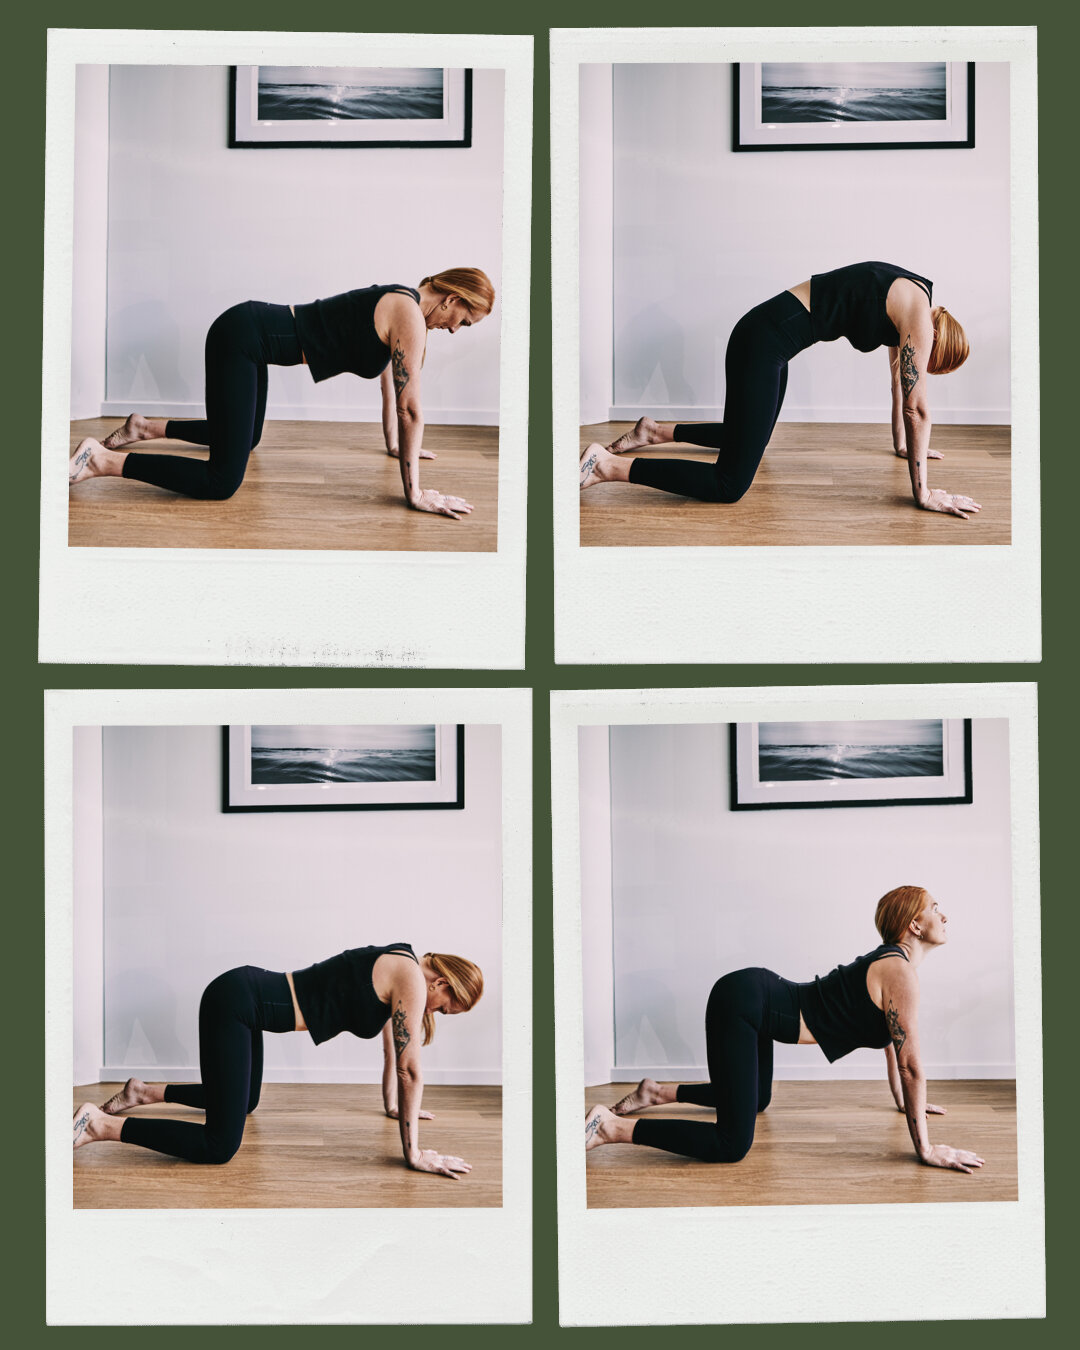 The cat camel exercise is a gentle and effective way to alleviate back pain, especially in the lower and mid-back regions. It involves moving the spine through flexion and extension, which helps to loosen up tight muscles and improve circulation in t